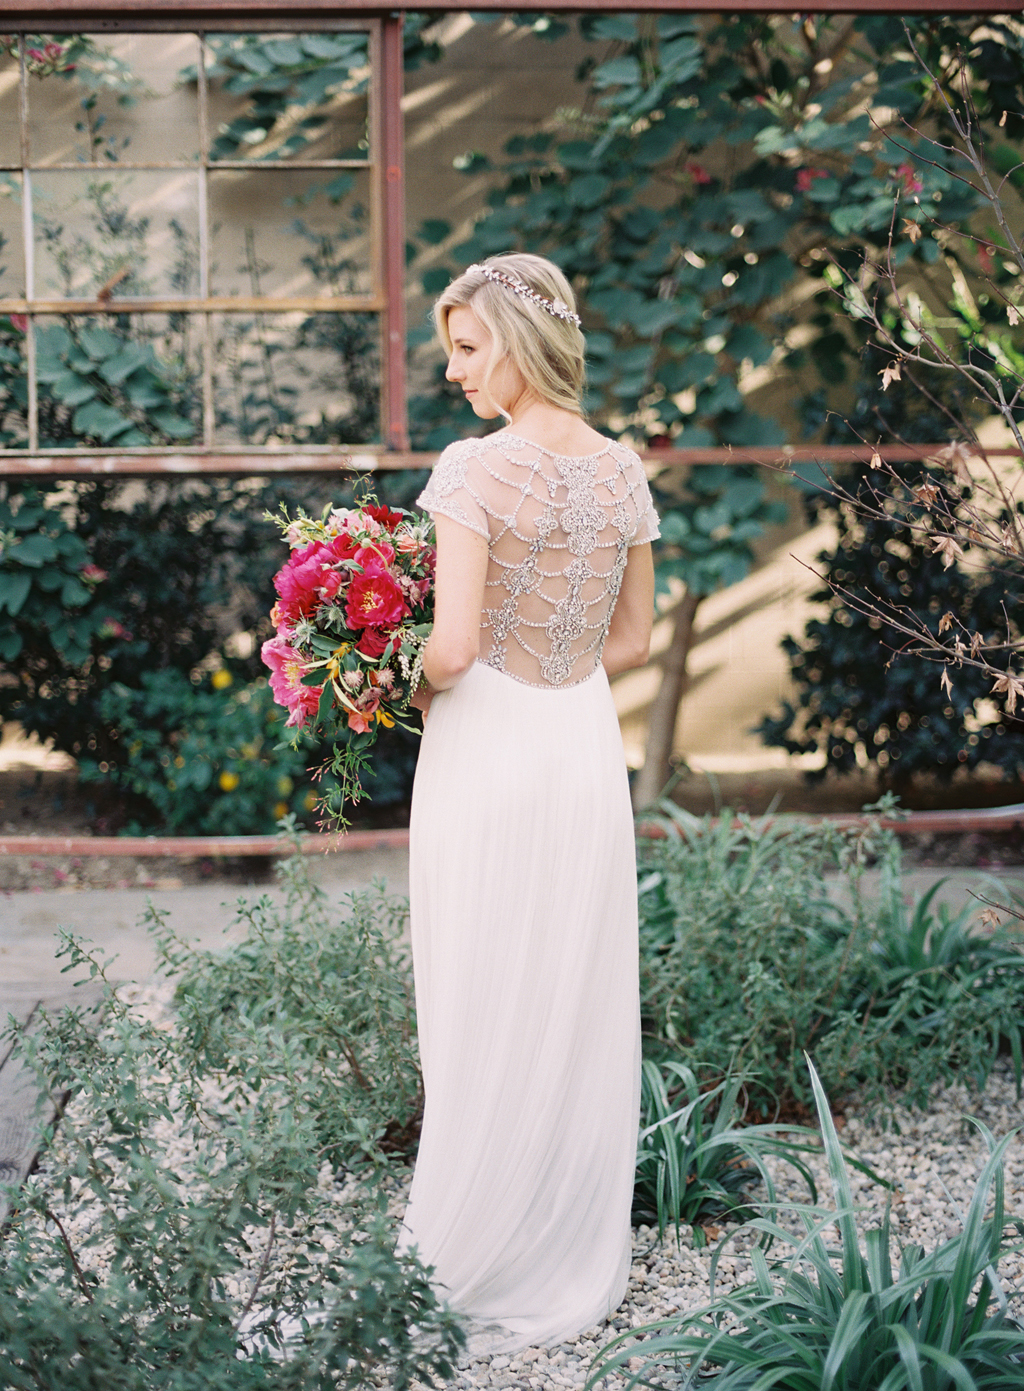 details of a beautufil BHLDN wedding dress at the Elysian Los Angeles